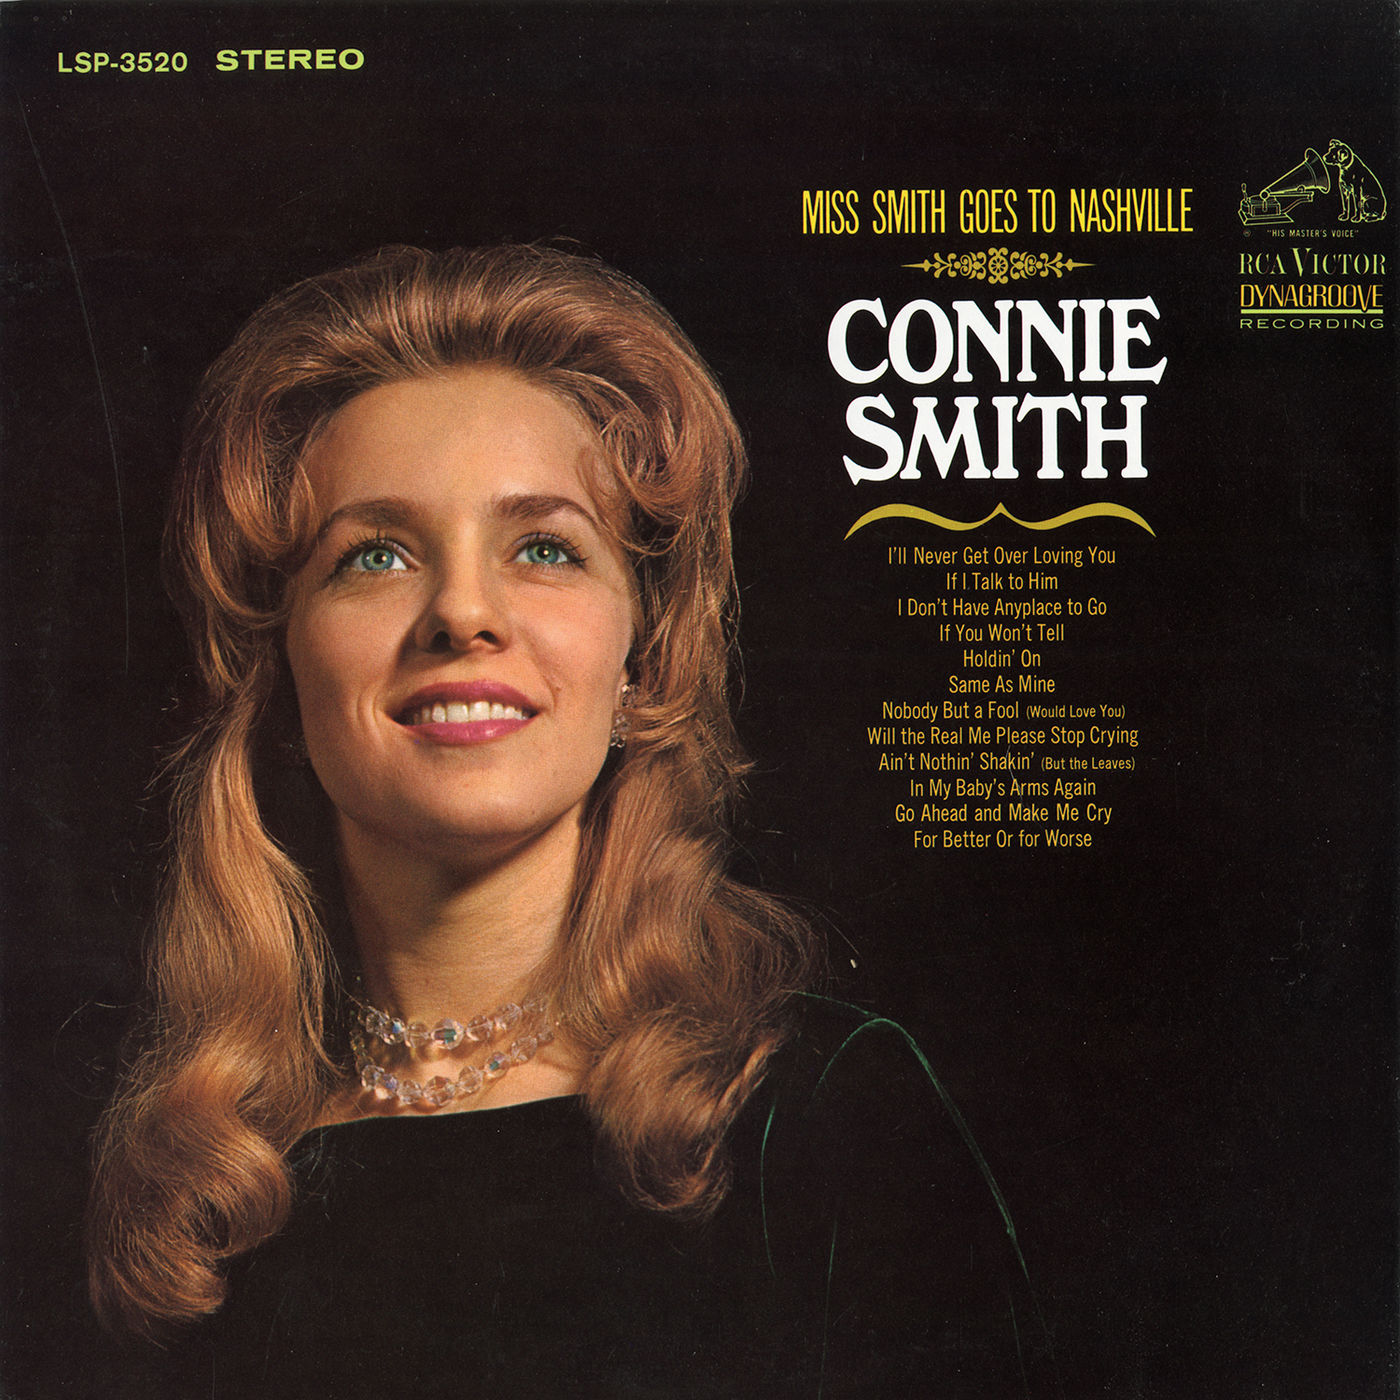 Connie Smith – Miss Smith Goes to Nashville